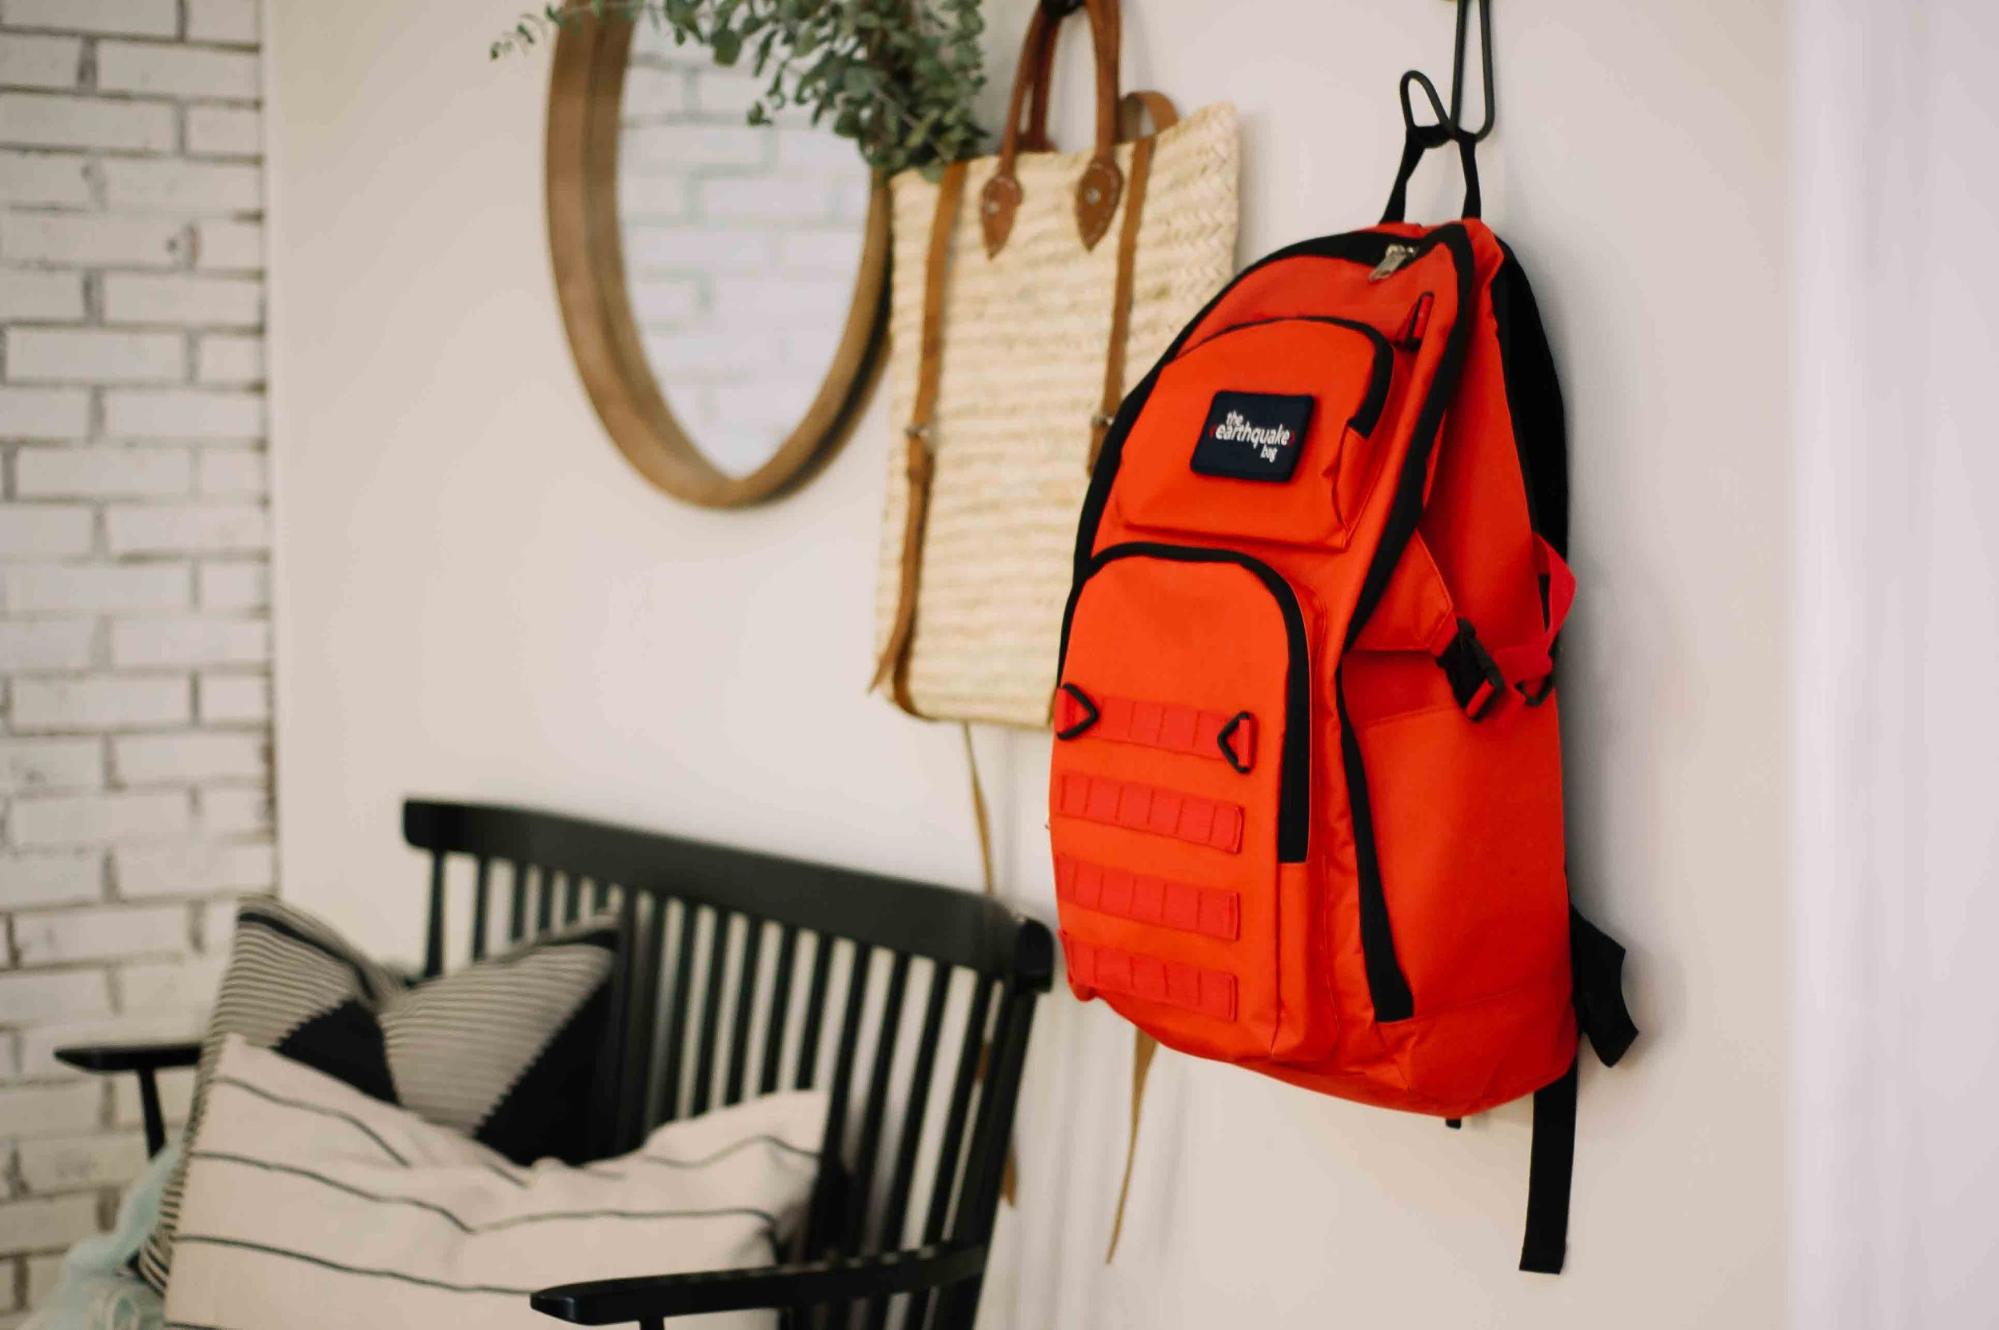 A Redfora backpack with emergency supplies on a coat hanger.